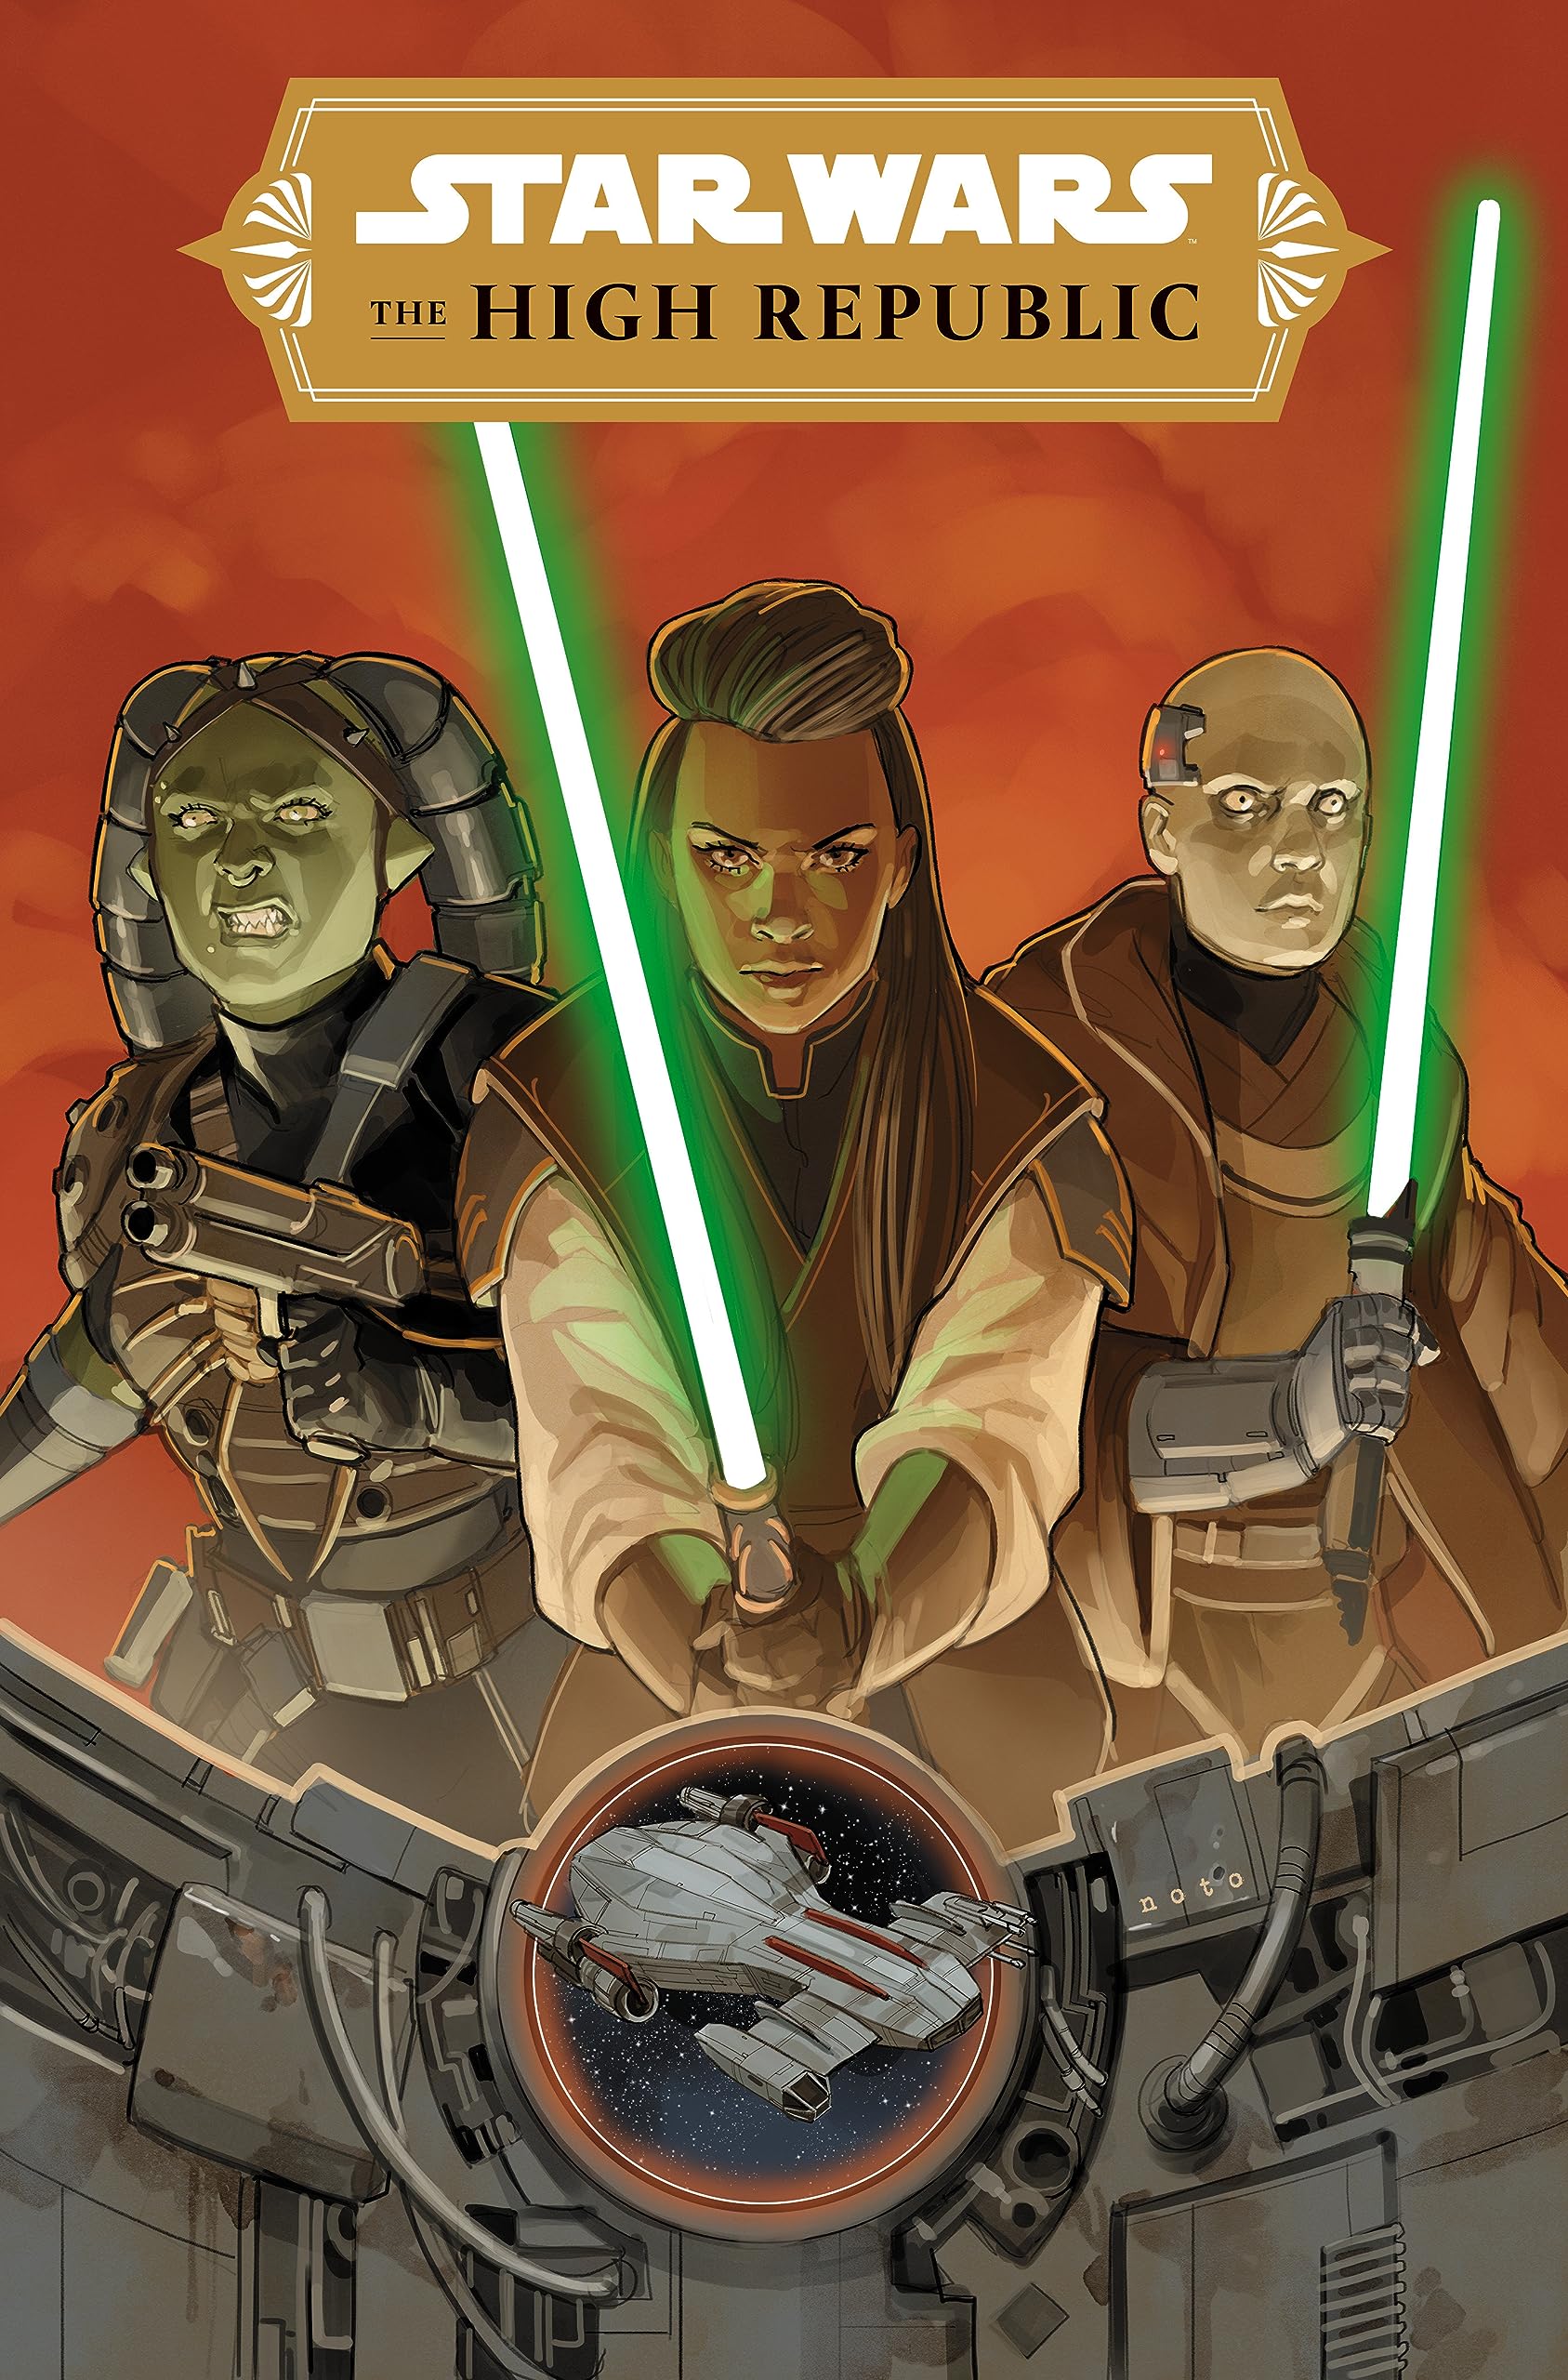 Star Wars: The High Republic - Shadows of Starlight (2023) #1, Comic  Issues